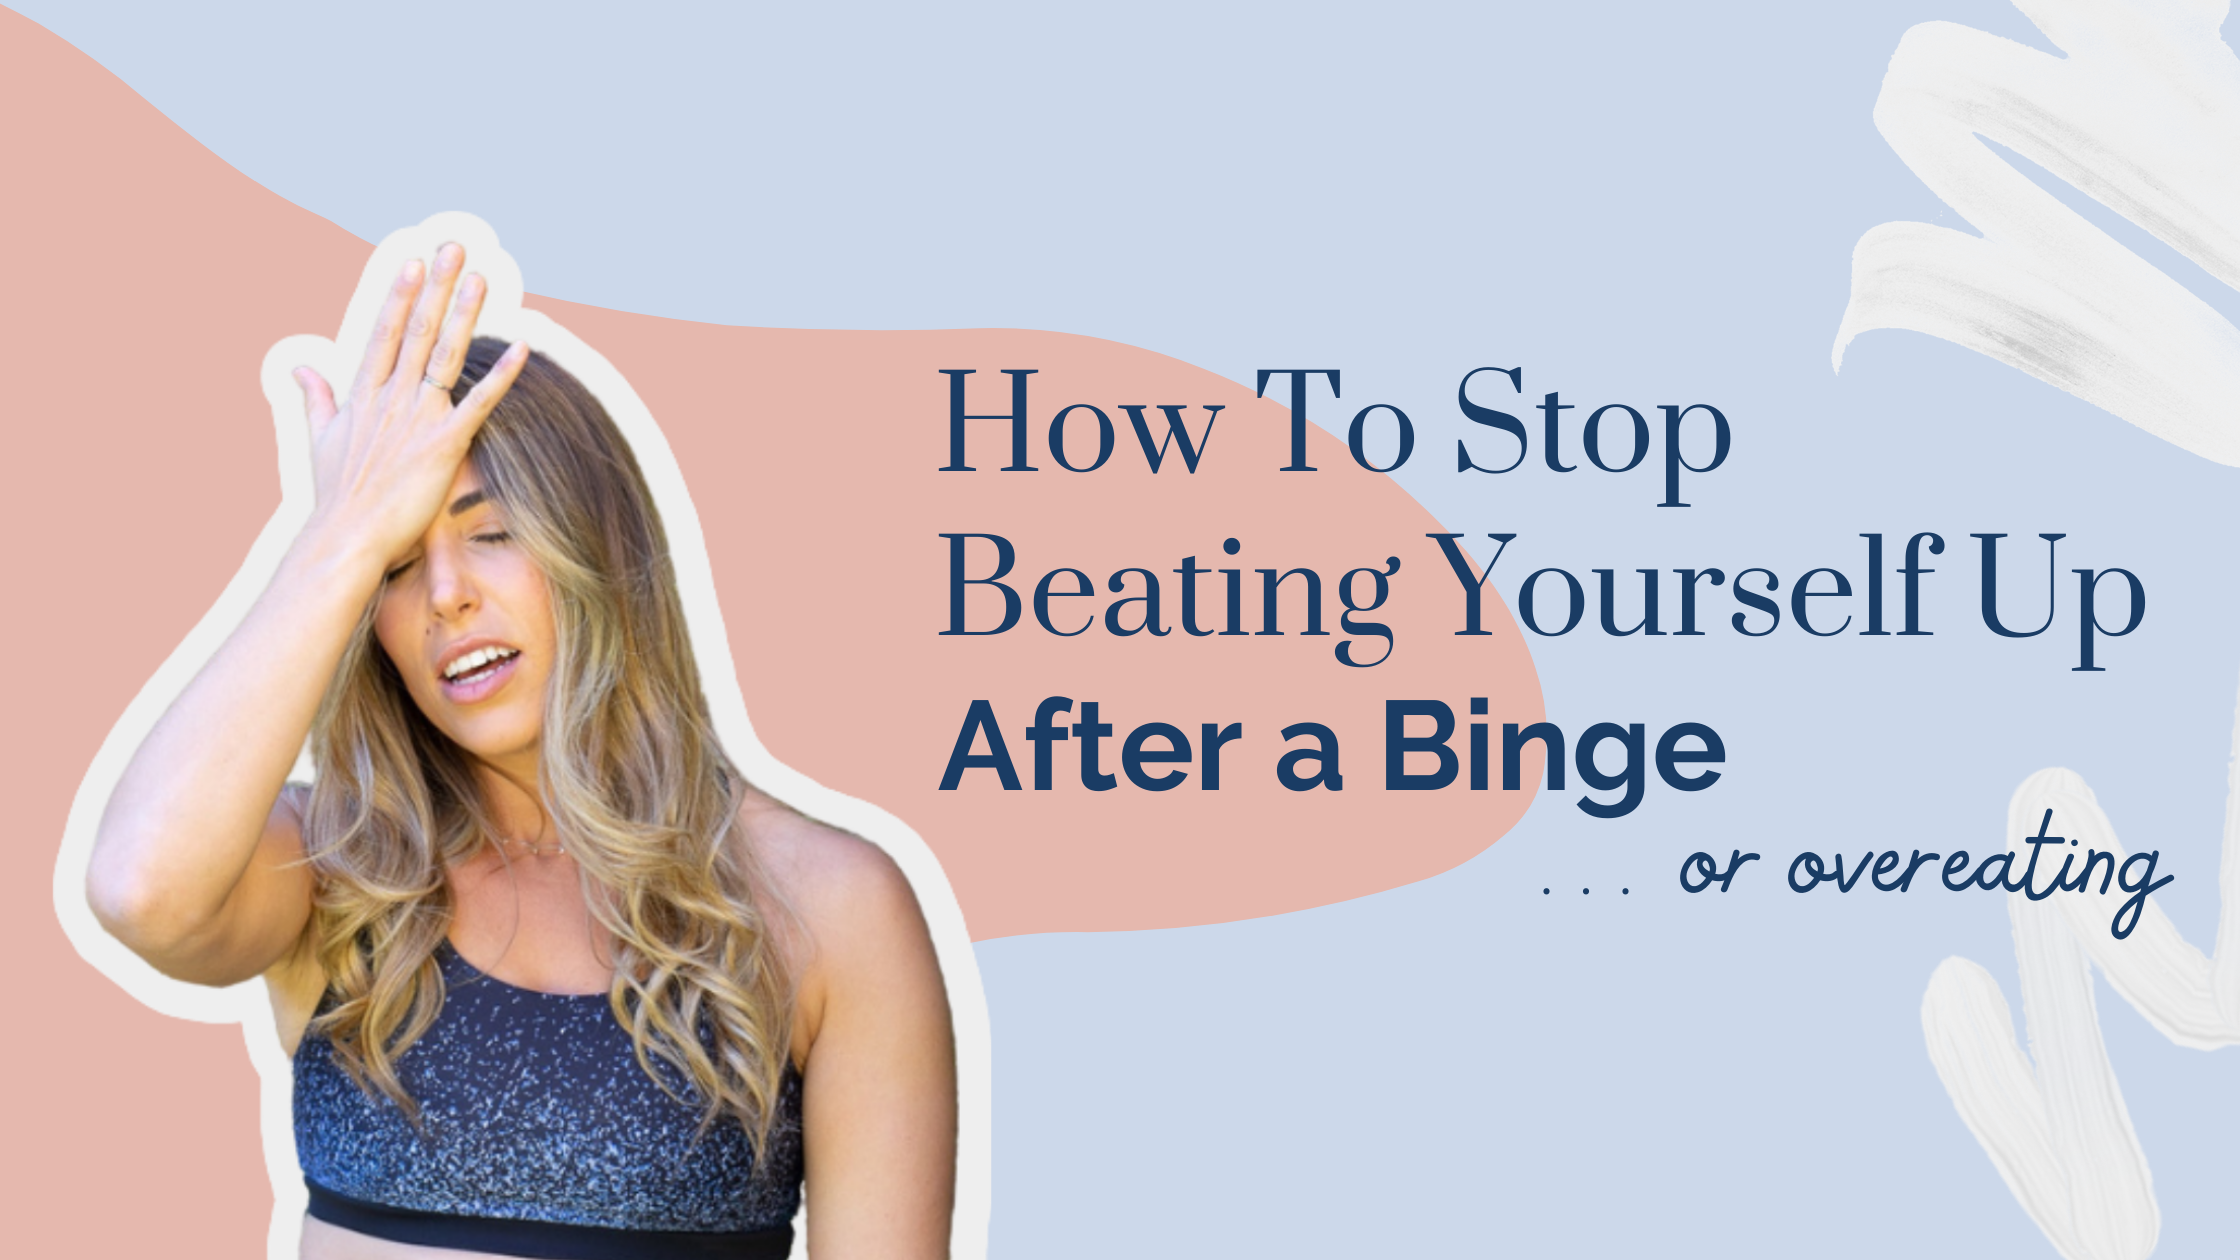 How To Stop Beating Yourself Up After a Binge or Overeating